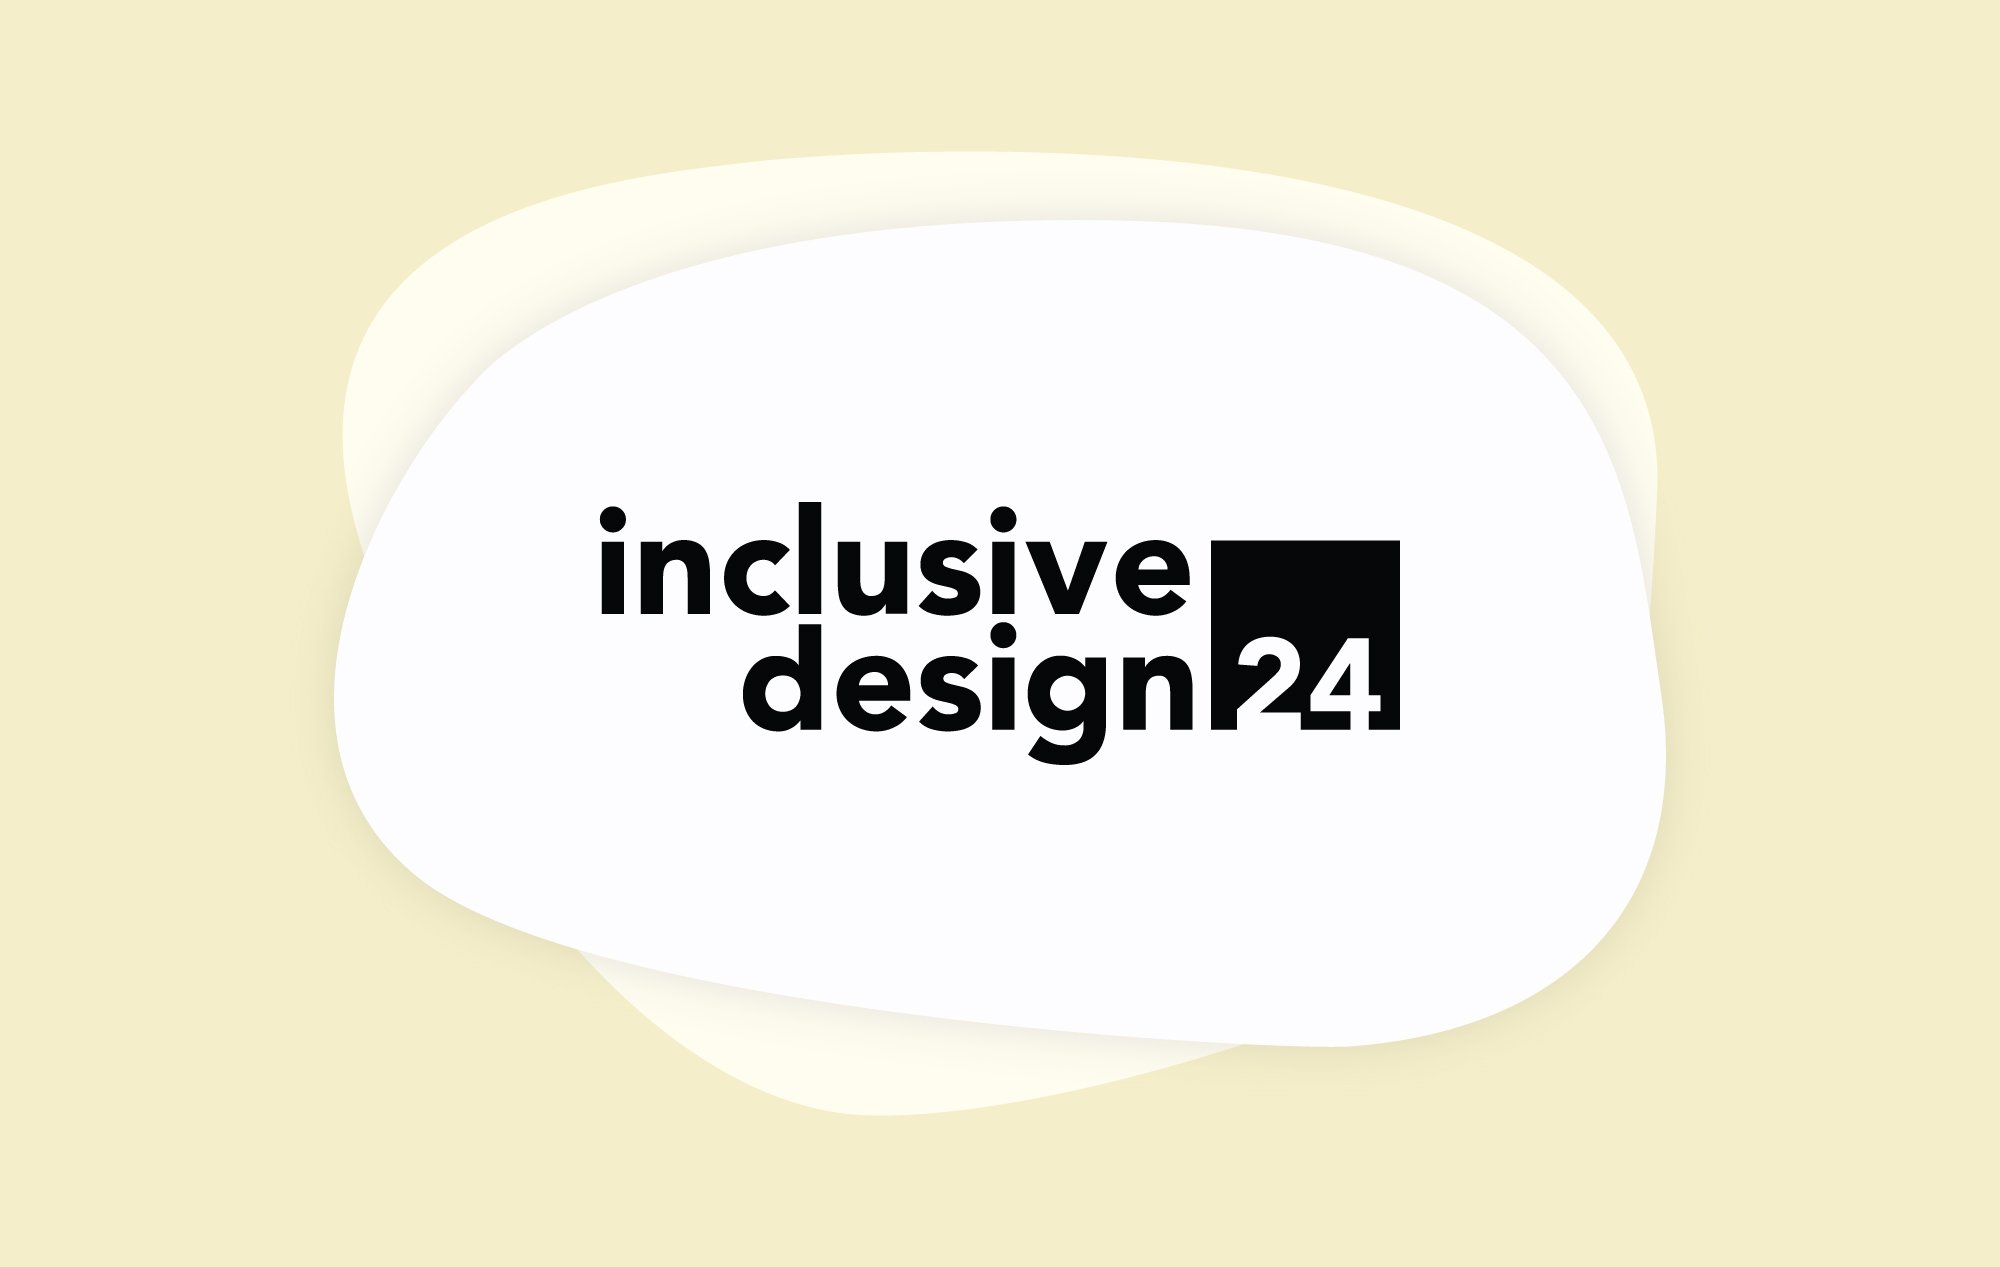 Inclusive Design 24 logo on a light yellow background.